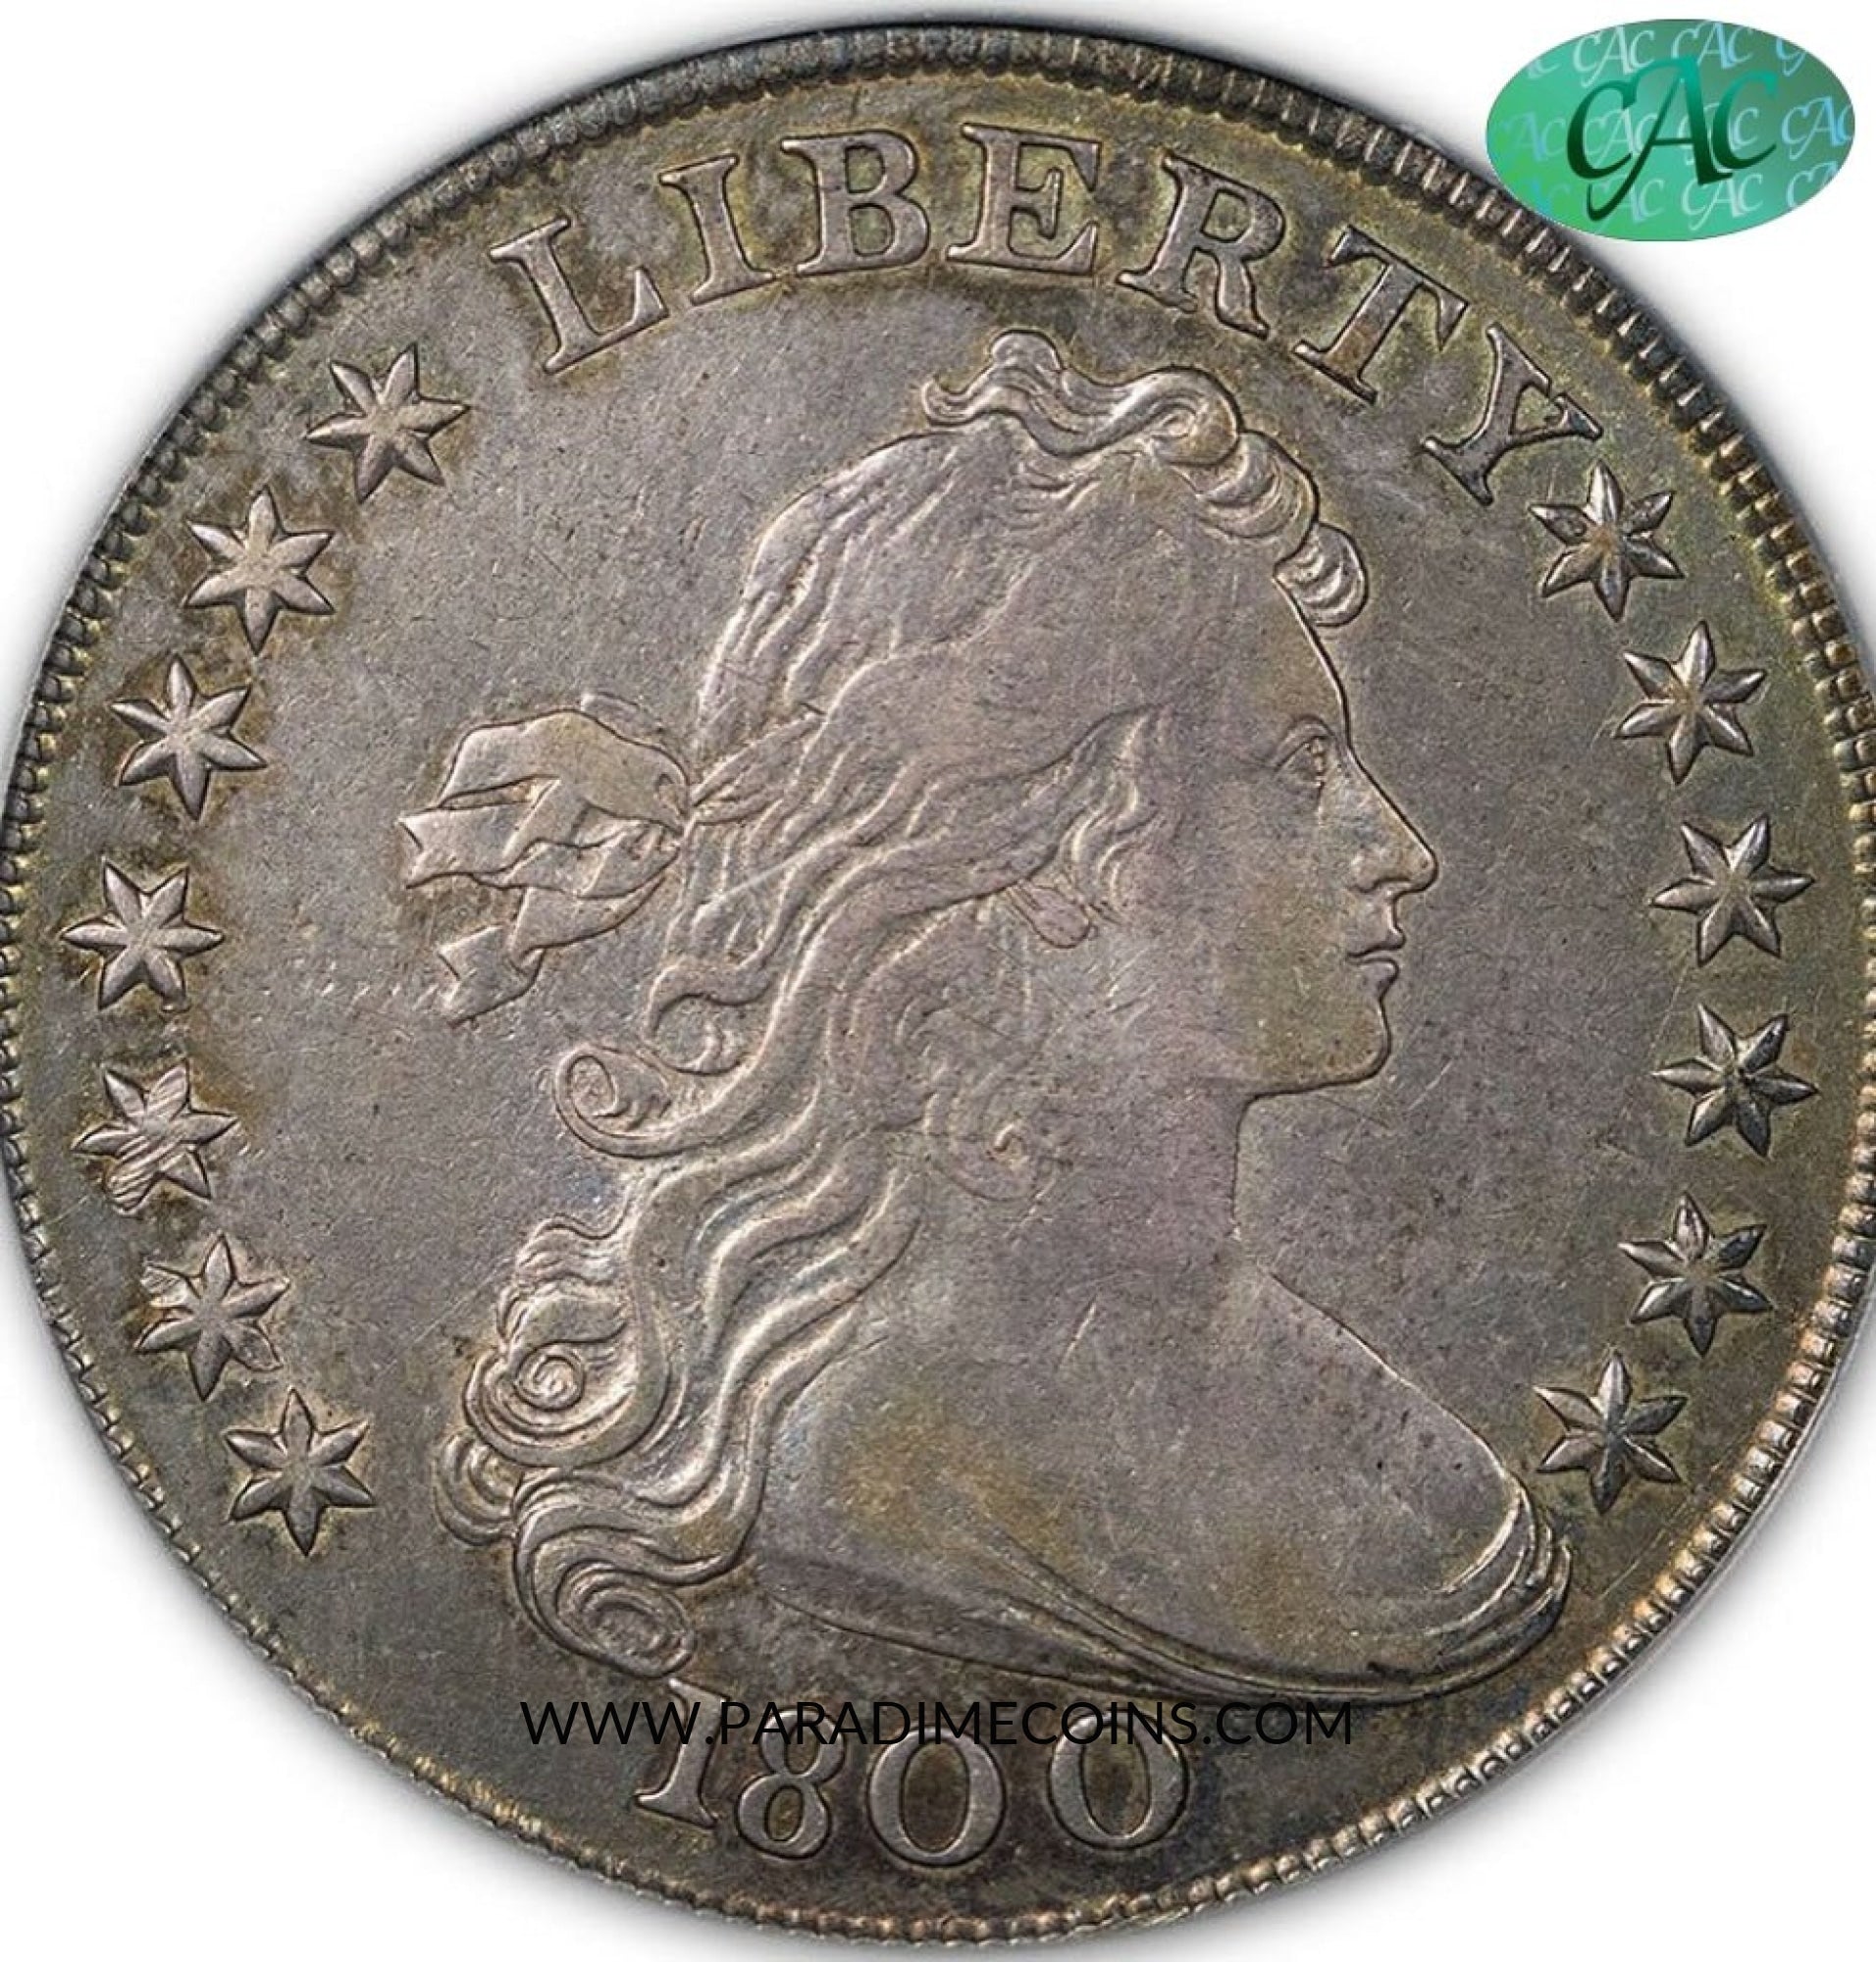 1800 $1 XF40 AMERICAI PCGS CAC - Paradime Coins US Coins For Sale